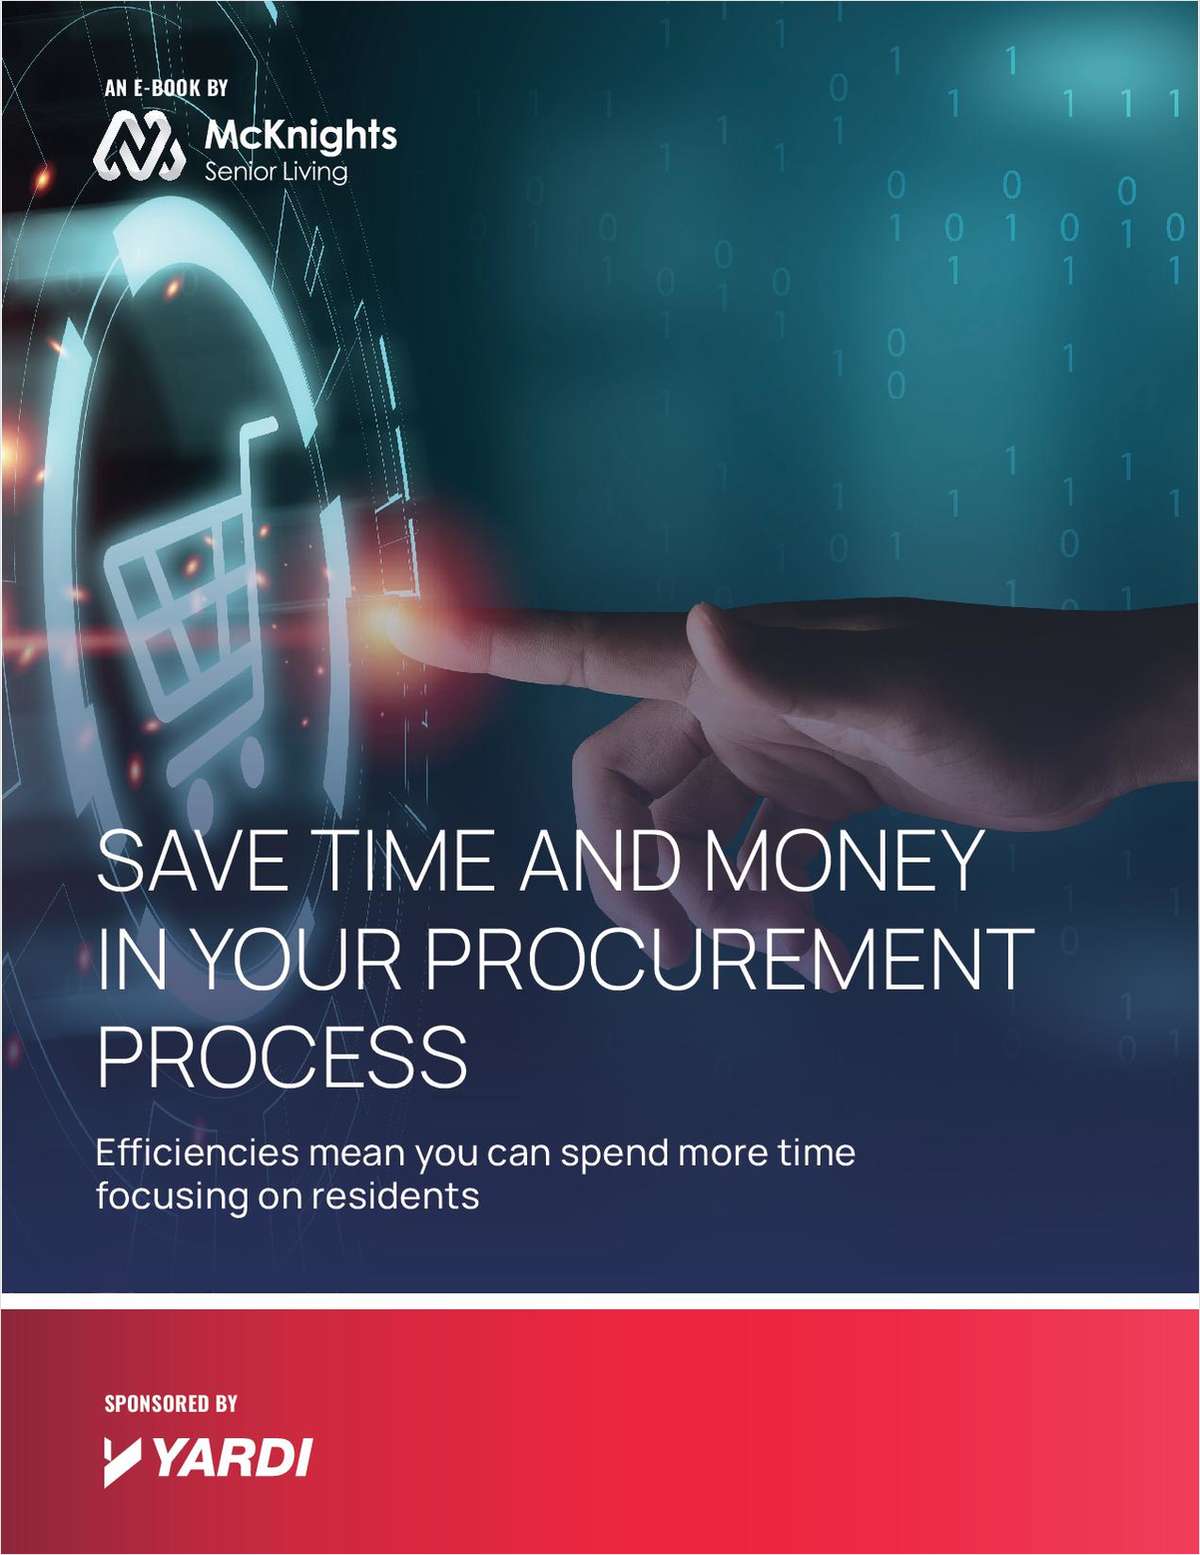 Save Your Time And Money In Your Procurement Process